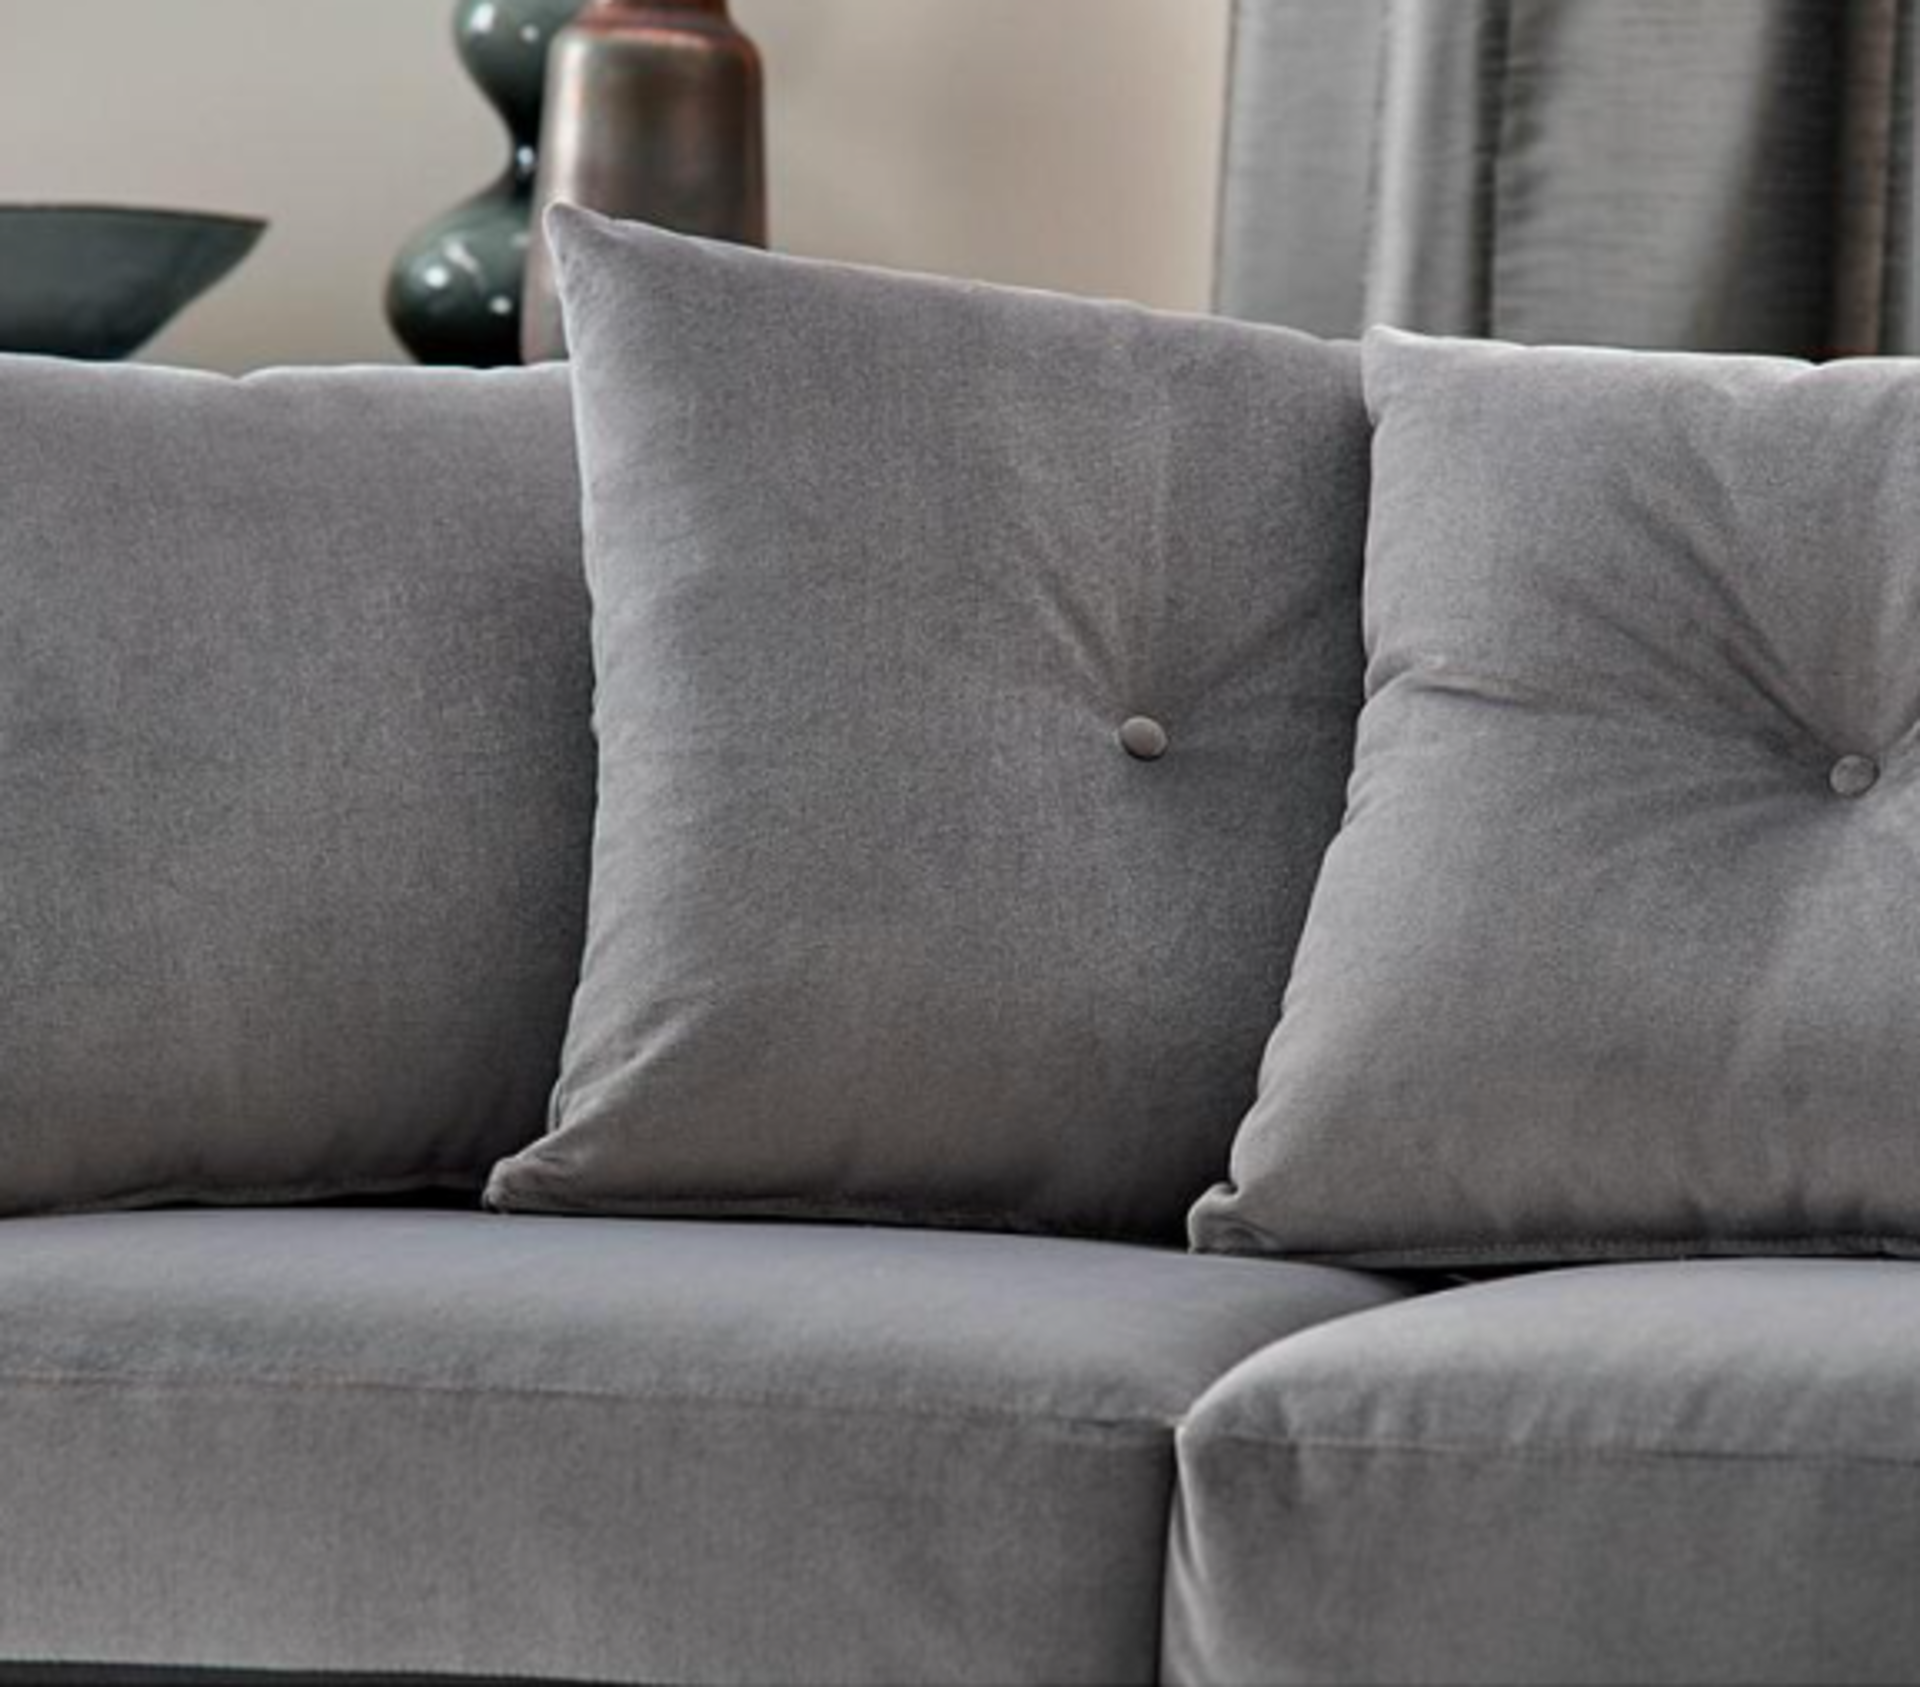 Derby 2 Seater Sofa. - SR. RRP £799.00. Discover maximum comfort and luxury with this gorgeous - Image 3 of 3